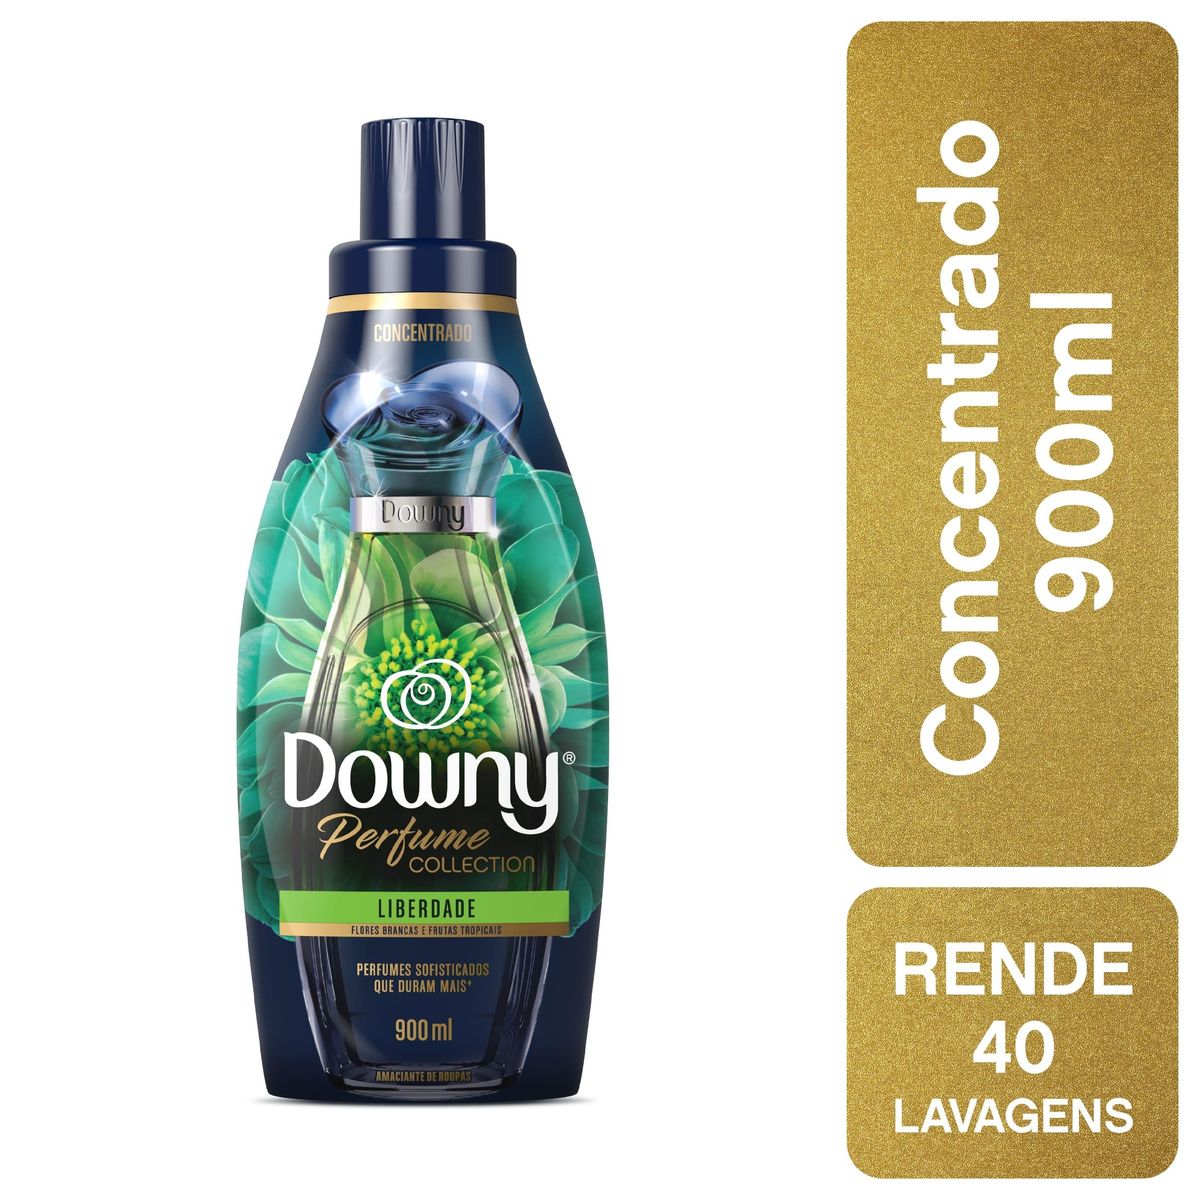 Amaciante Conc. Downy Perfume Collection Liberdade 900ml image number 1